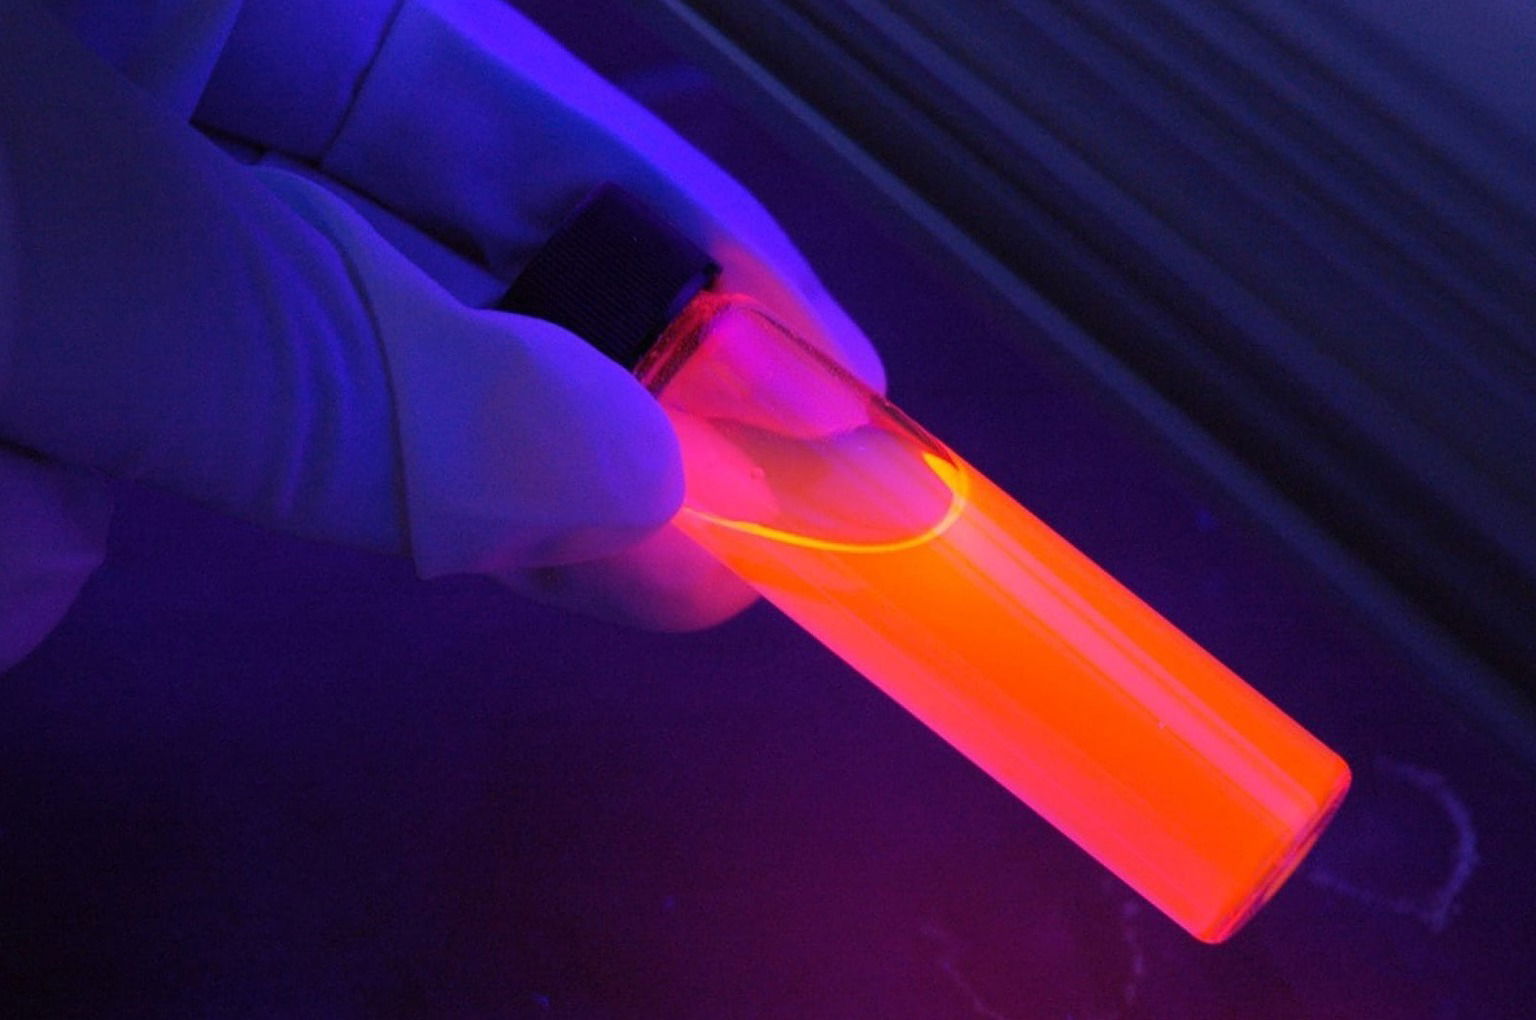 Fluorescence - or why it glows?